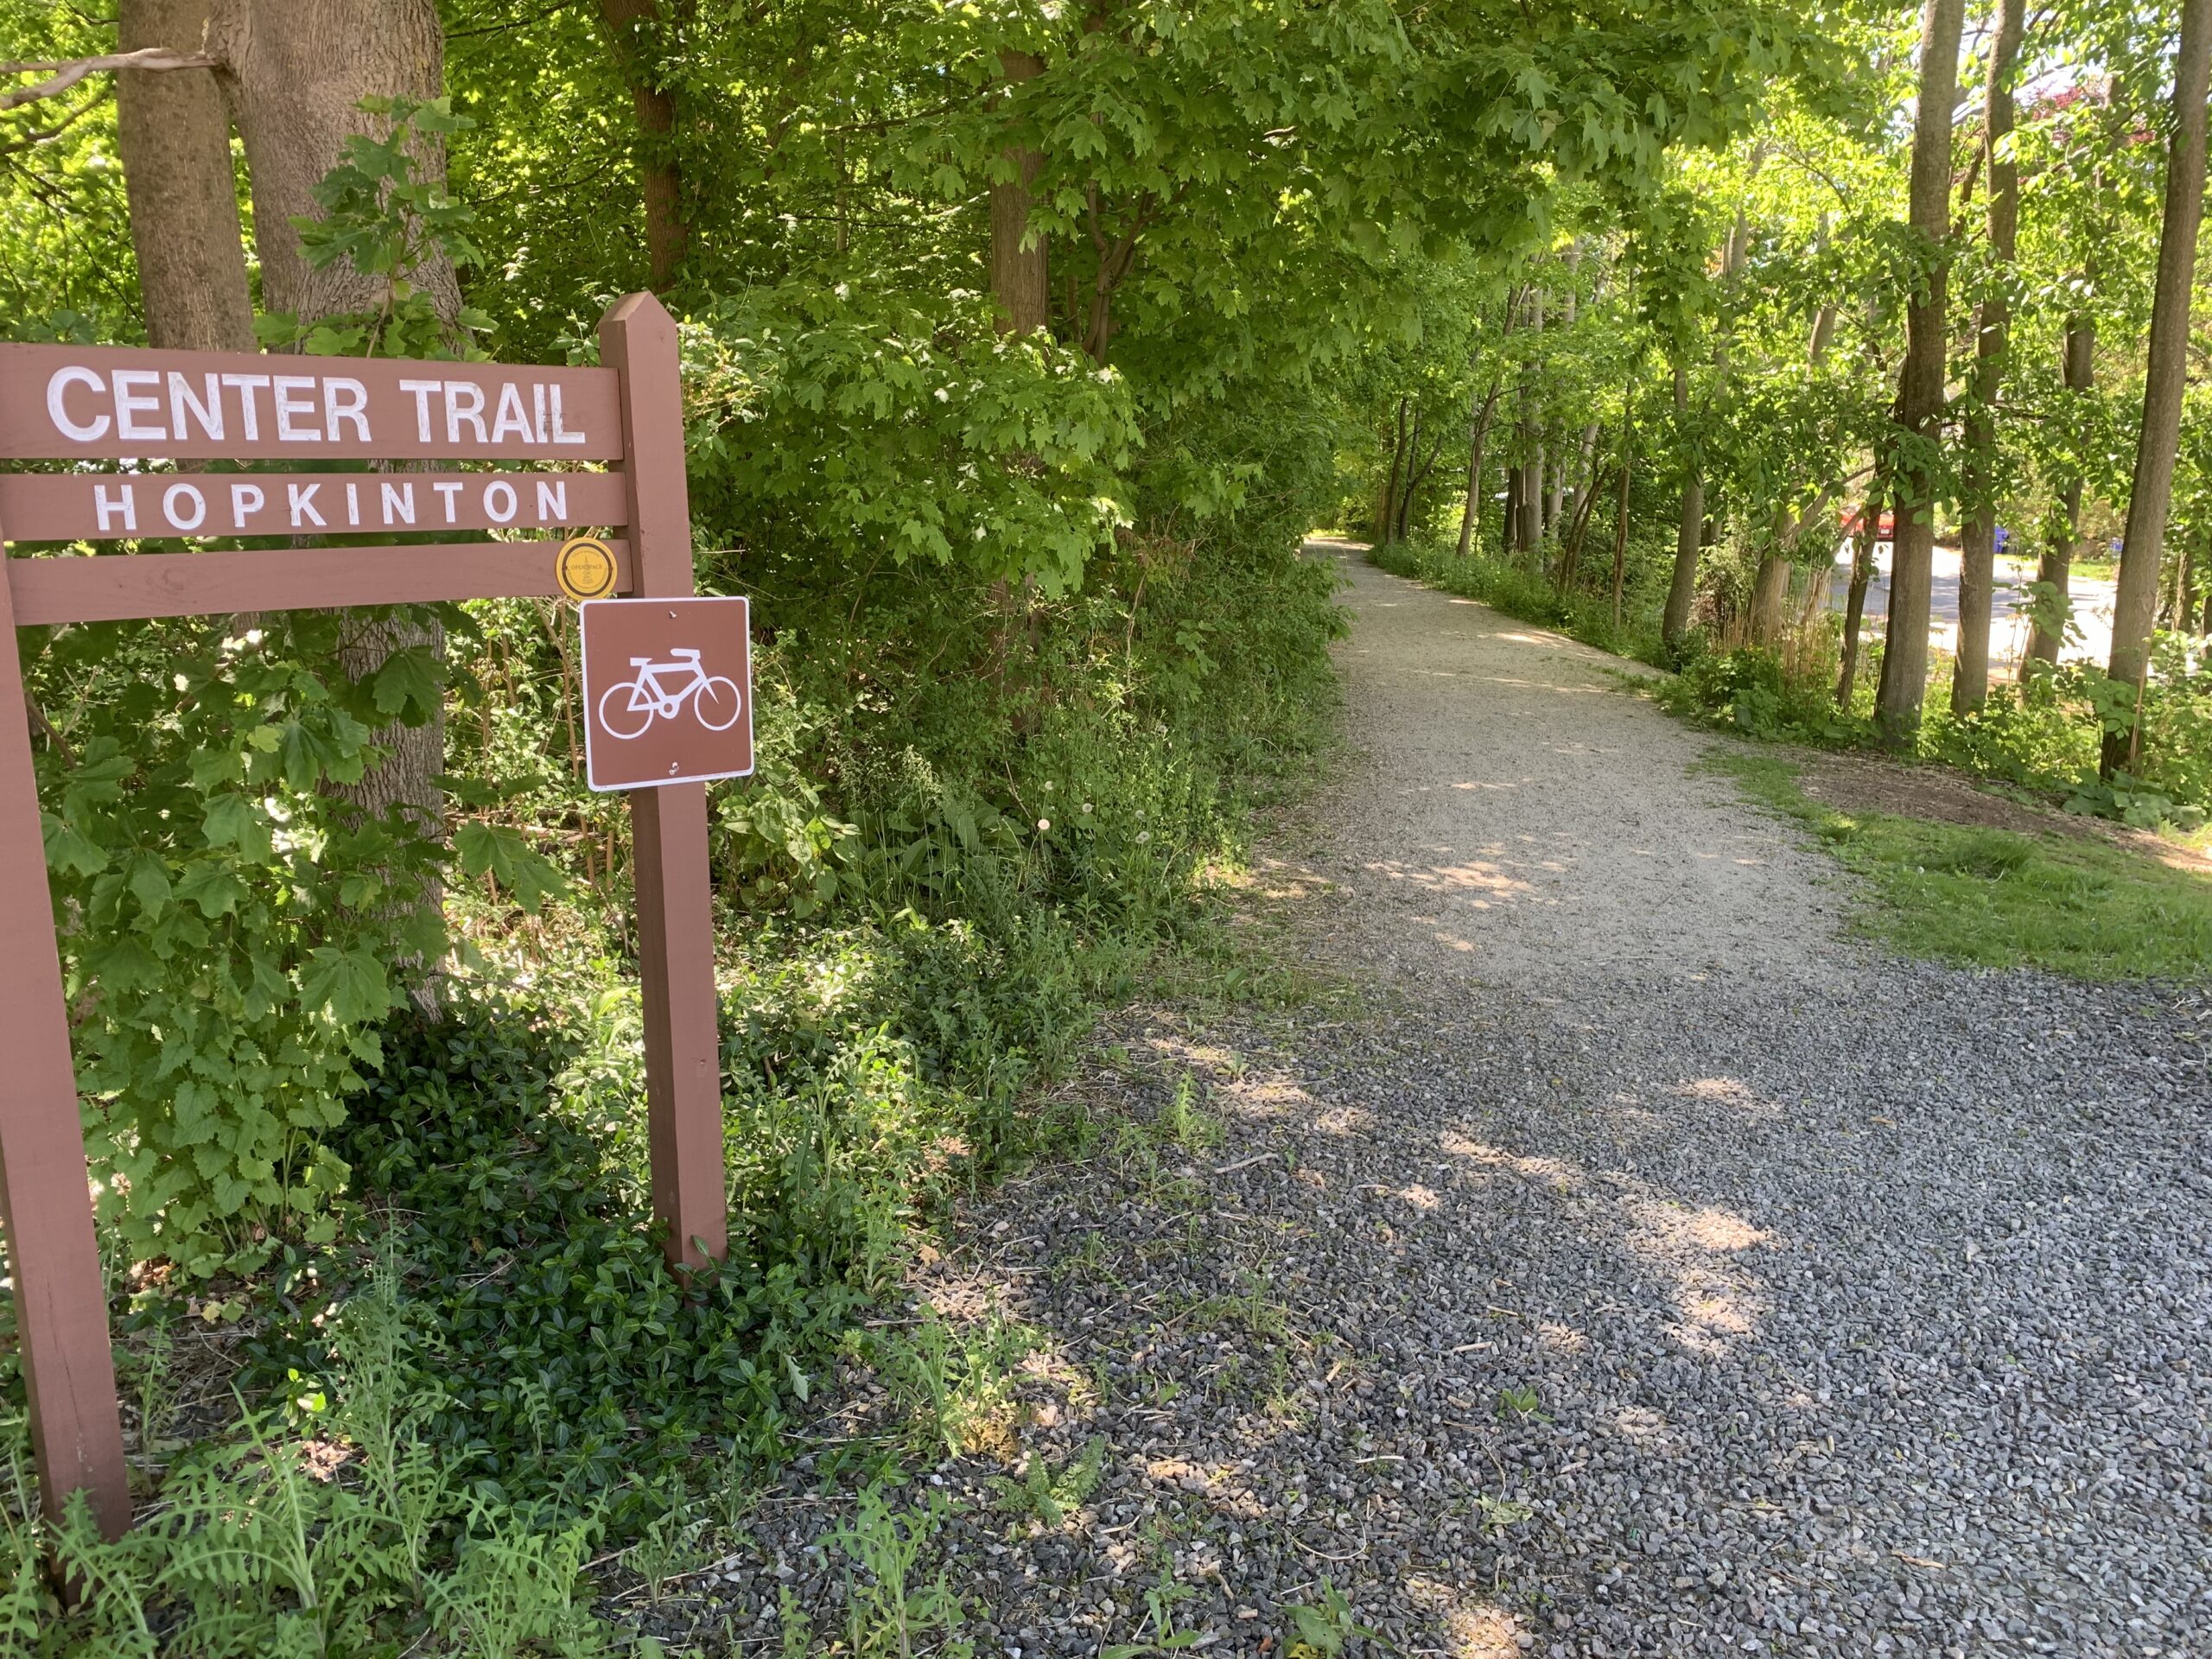 Trails Committee reviews committee charges, approves Scout project requests